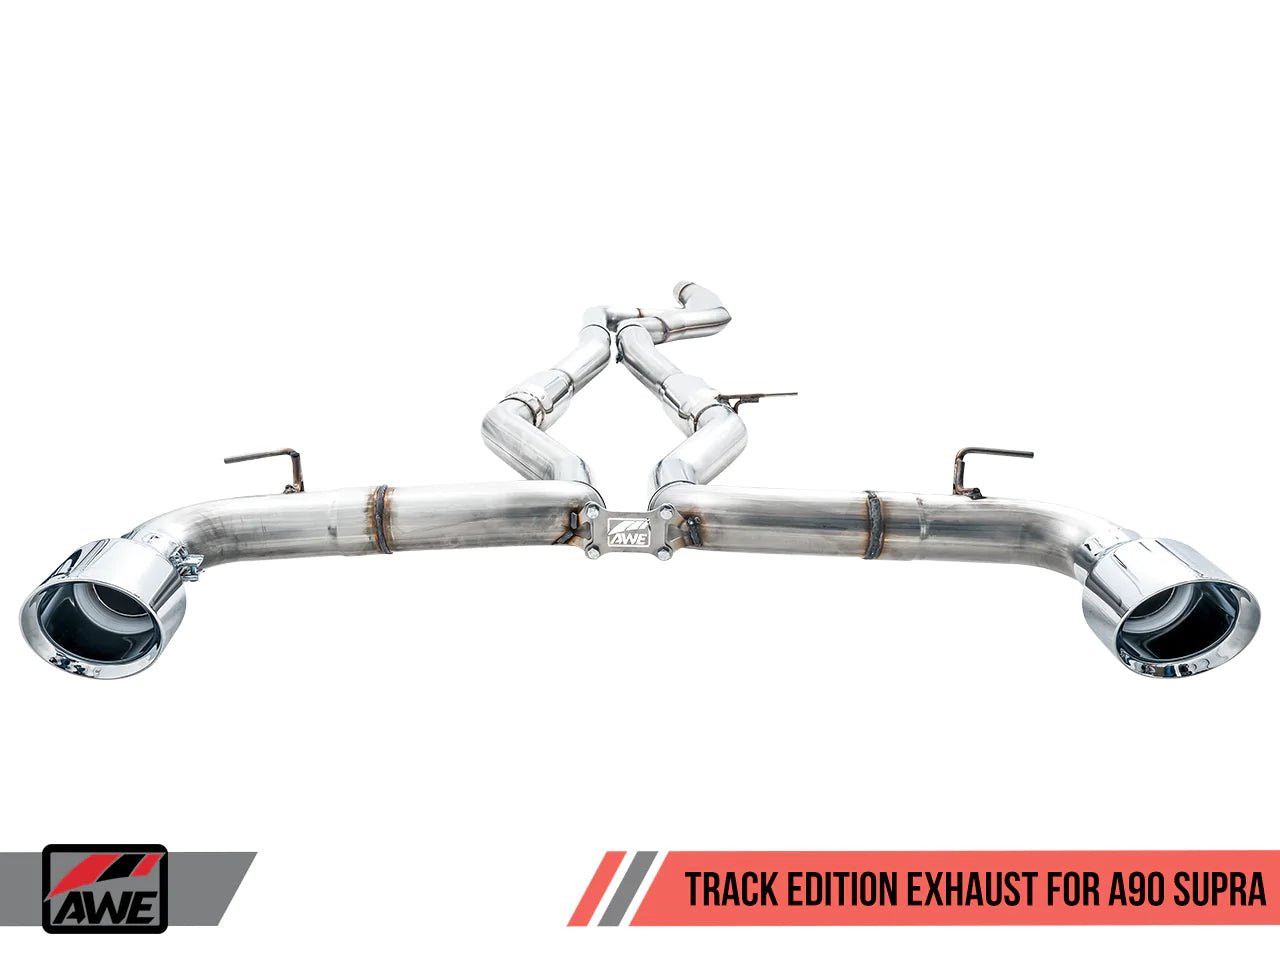 AWE Exhaust Suite For The Toyota GR Supra